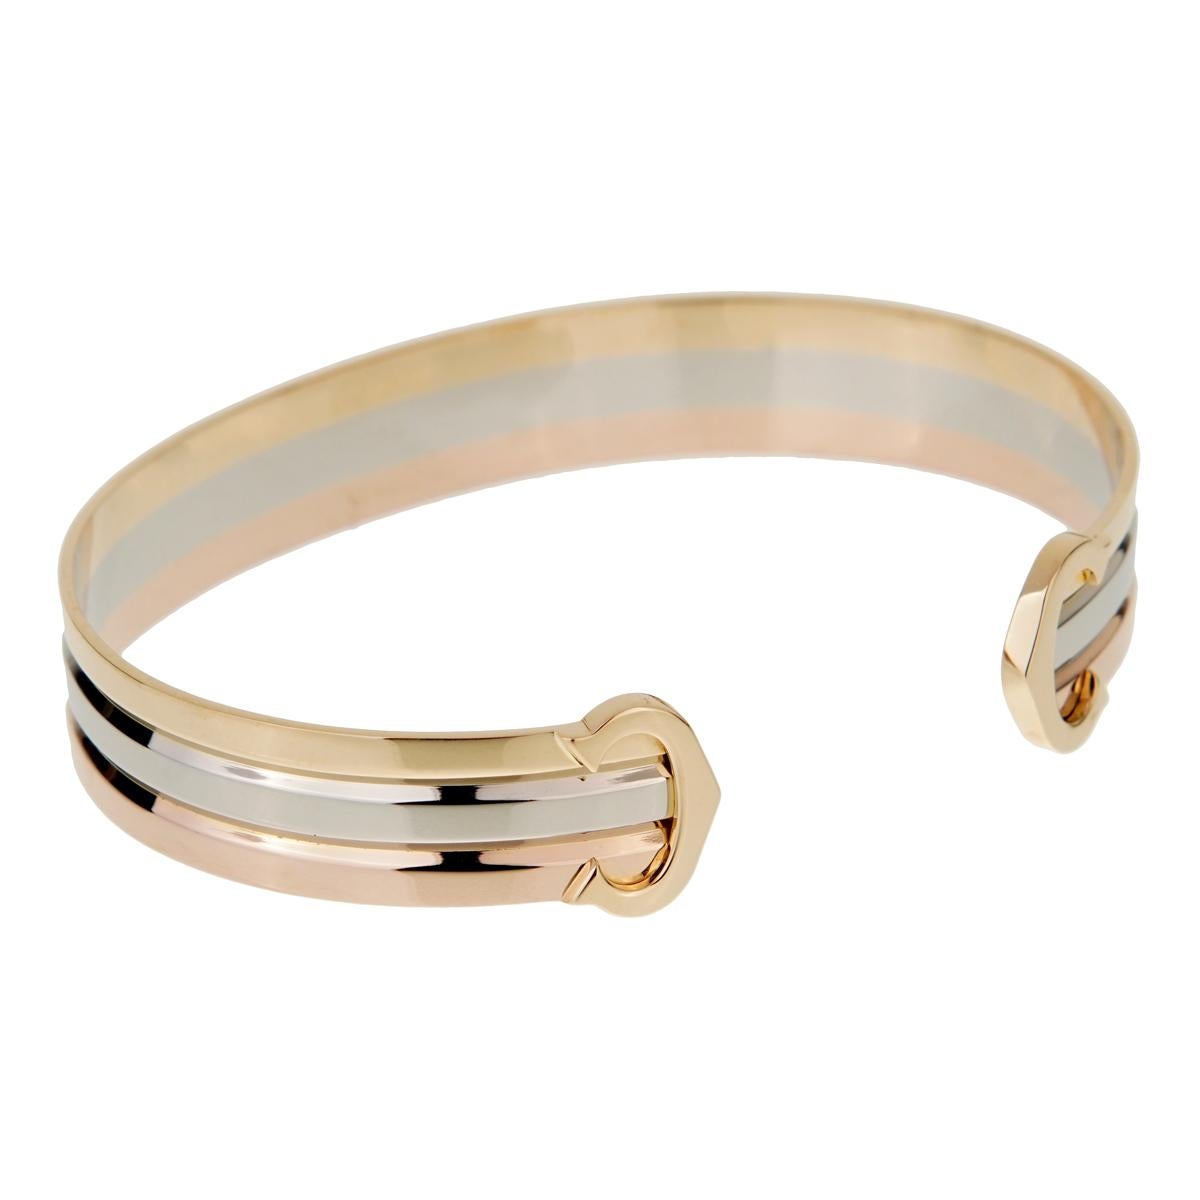 A chic Cartier bracelet from the C de Cartier collection featuring white, yellow and rose gold complemented with the iconic Cartier C motifs.

Size Medium, Upto 6 3/4